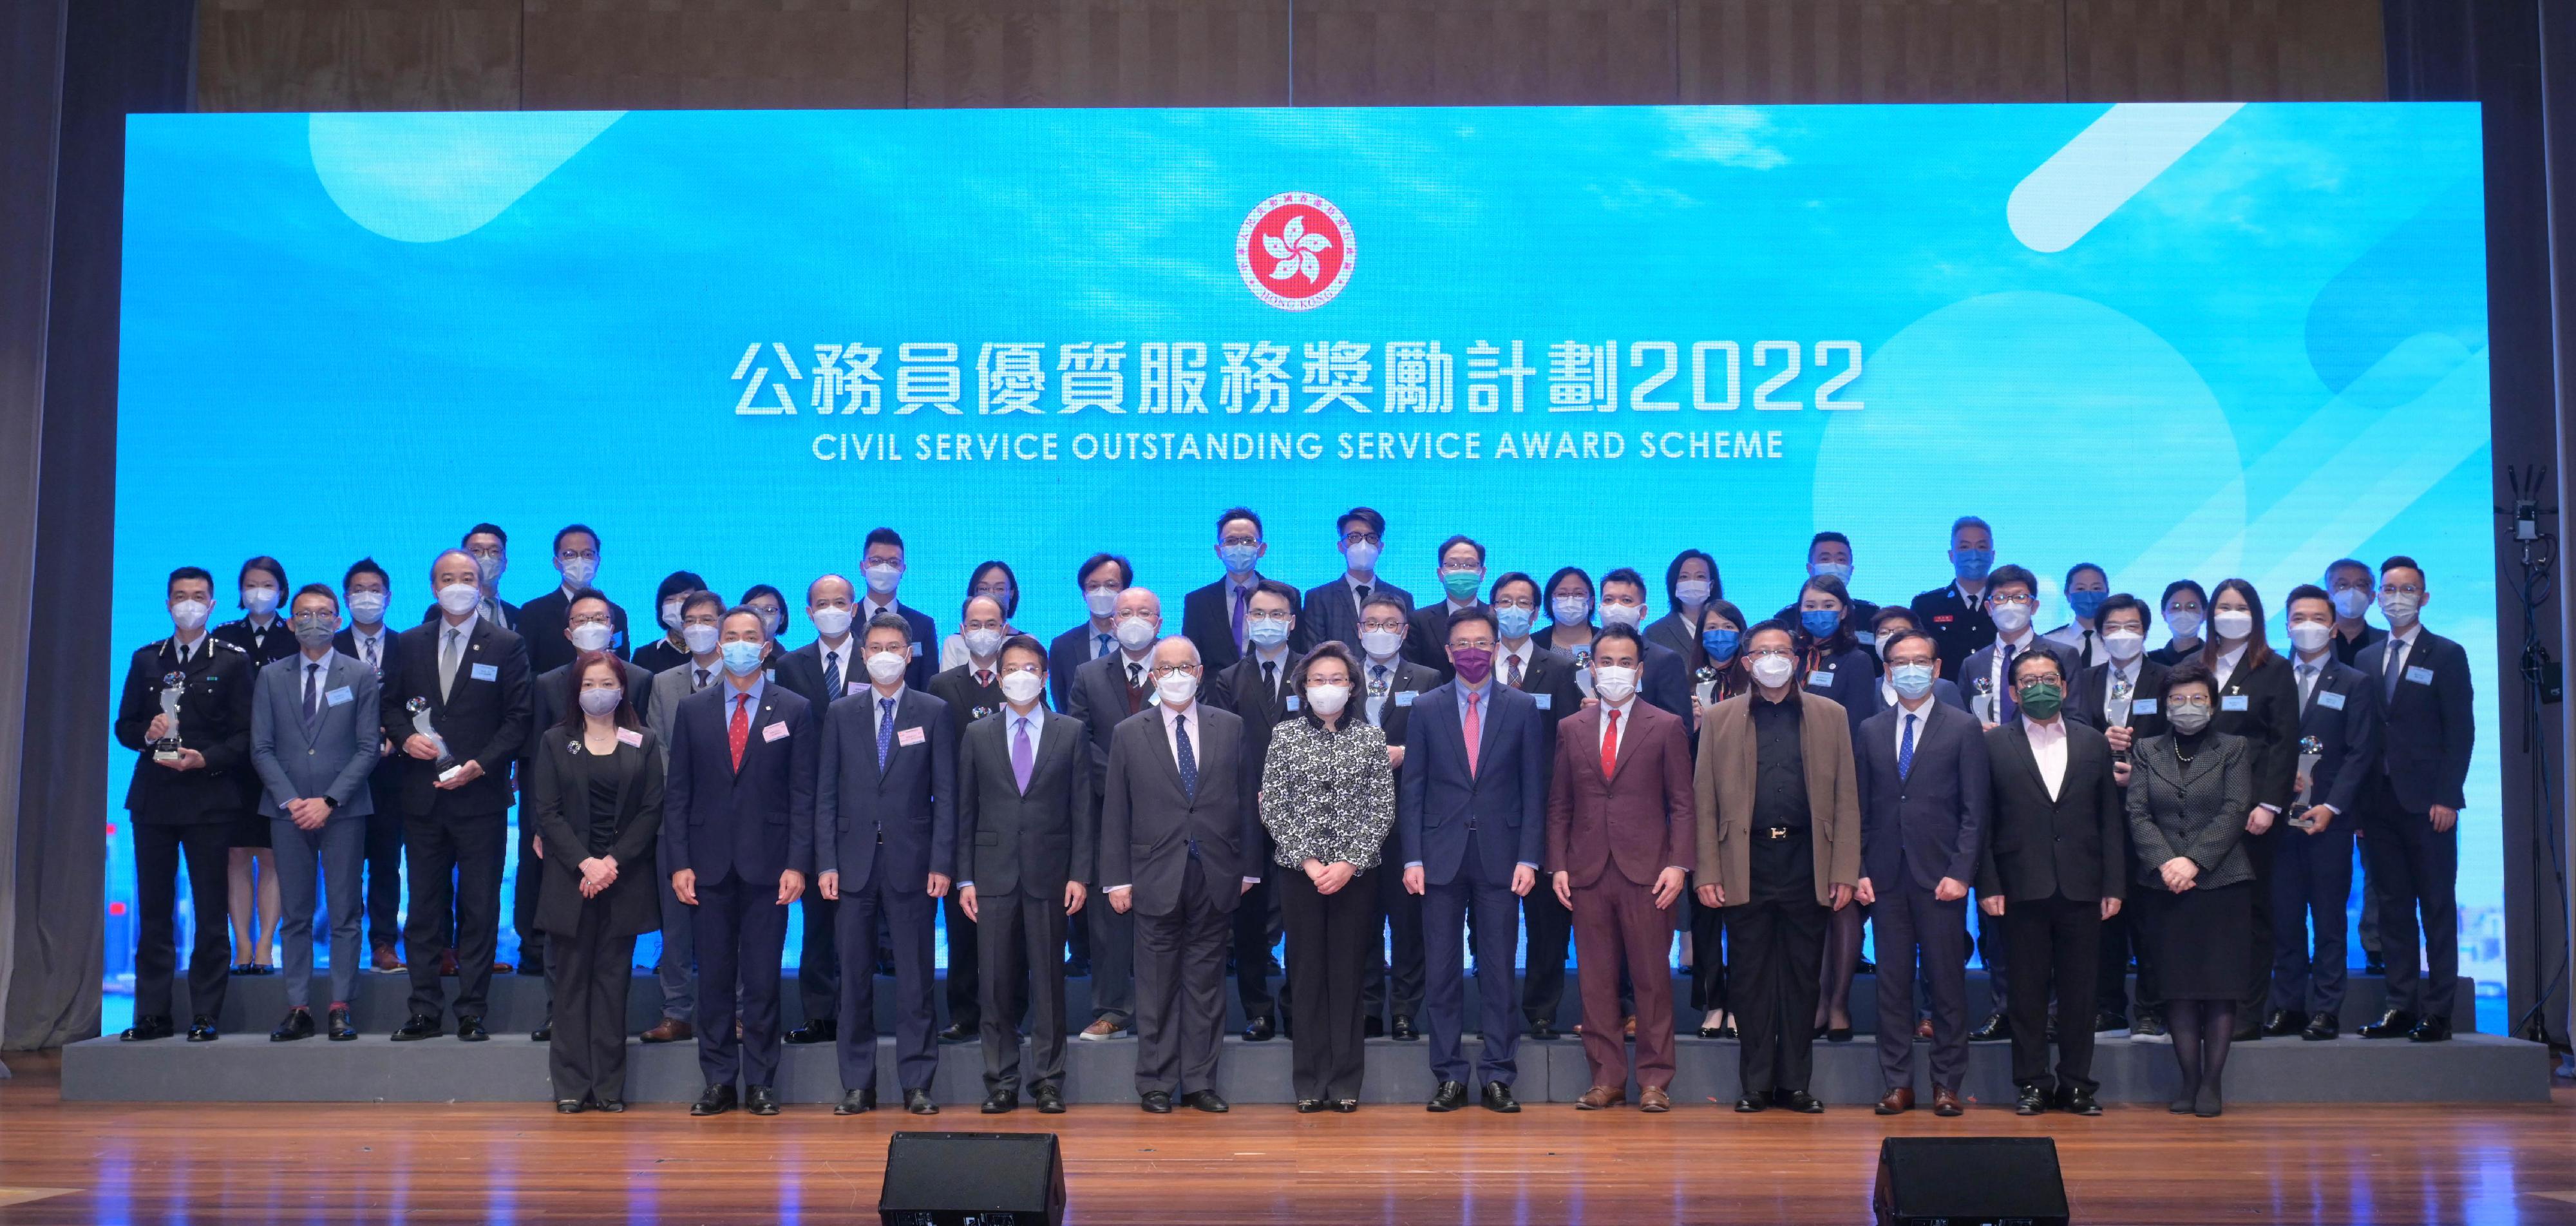 The prize presentation ceremony of the Civil Service Outstanding Service Award Scheme 2022 was held at the Hong Kong Convention and Exhibition Centre today (December 12). Photo shows (front row, from left) the Executive Director of the Hong Kong Management Association, Ms Titania Woo; the Head of the Civil Service College, Mr Oscar Kwok; the Permanent Secretary for Innovation, Technology and Industry, Mr Eddie Mak; the Permanent Secretary for the Civil Service, Mr Clement Leung; Executive Council member Dr Moses Cheng; the Secretary for the Civil Service, Mrs Ingrid Yeung; the Secretary for Innovation, Technology and Industry, Professor Sun Dong; Legislative Council members who took up chairmanship of the final adjudication panels, namely Mr Kwok Wai-keung, Dr Junius Ho, Mr Tony Tse, and Mr So Cheung-wing; and the Chairman of the Public Service Commission, Mrs Rita Lau; are pictured with representatives of prize winning departments at the ceremony.